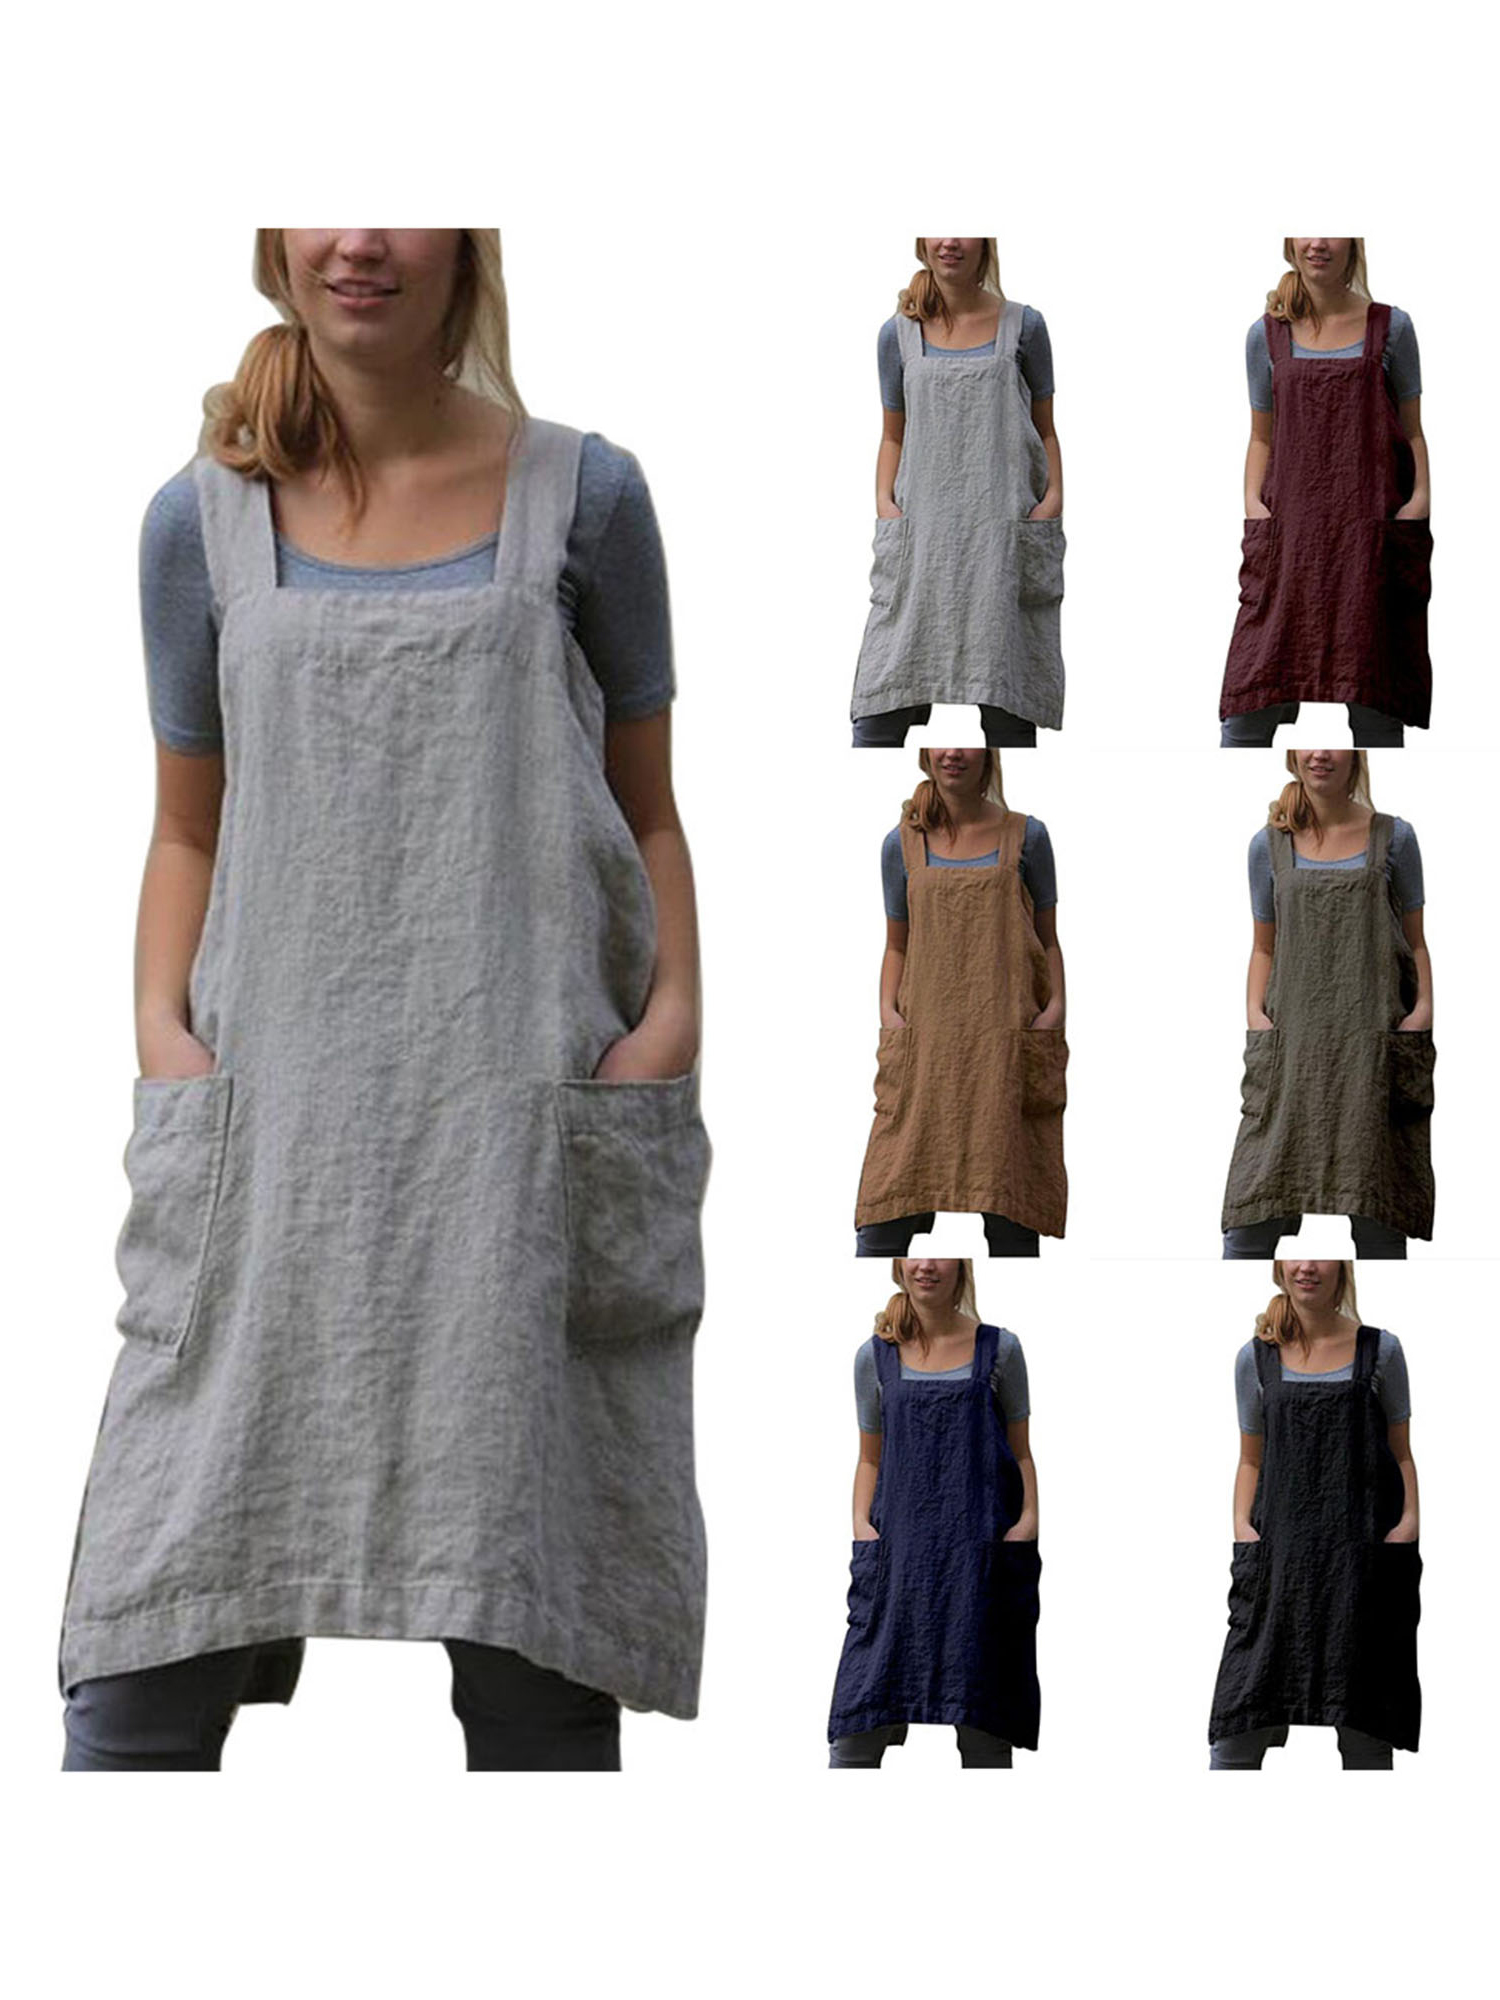 Listenwind Women’s Pinafore Square Apron Baking Cooking Gardening Works Cross Back Cotton/Linen Blend Dress with 2 Pockets Large Plus - image 5 of 5